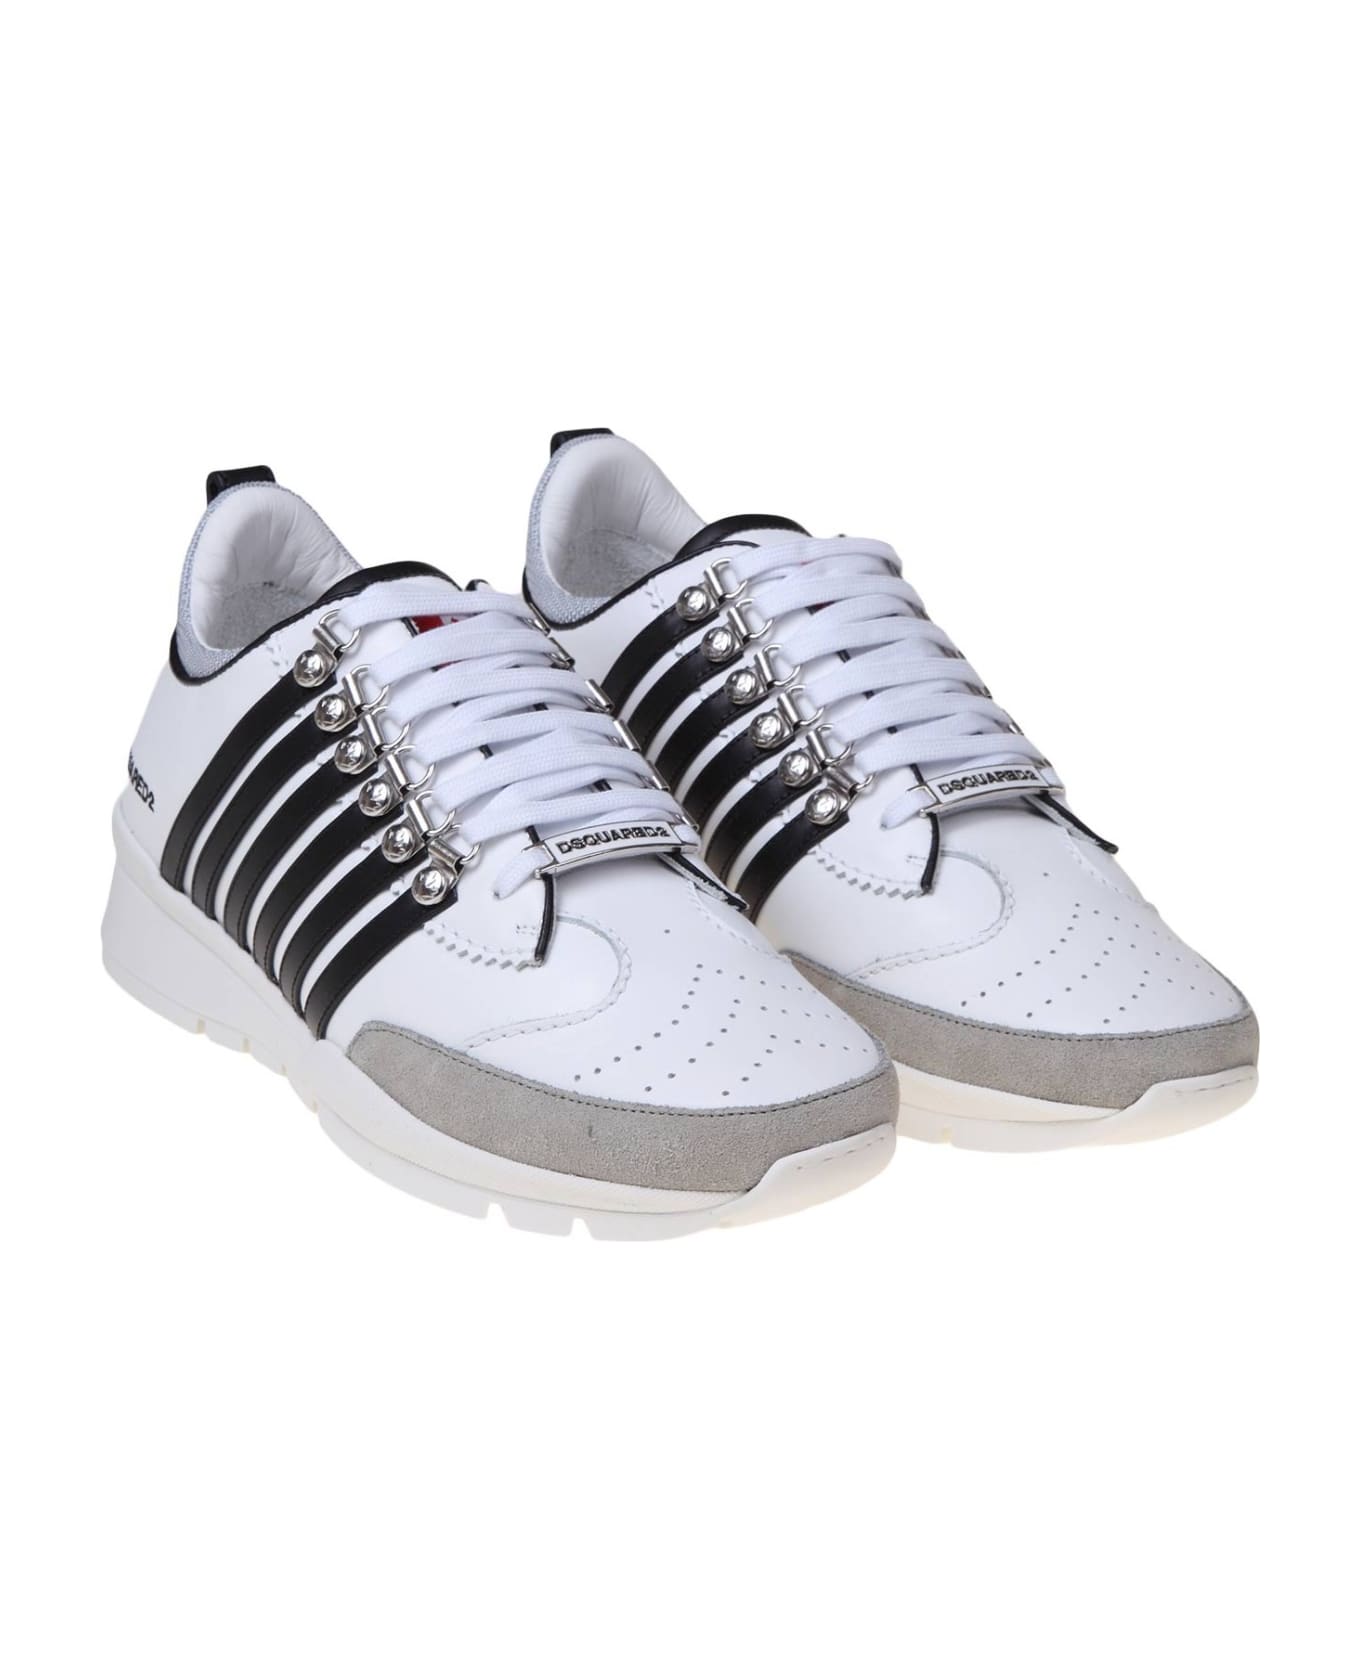 Dsquared2 Legendary Sneakers In Black And White Leather - white/black